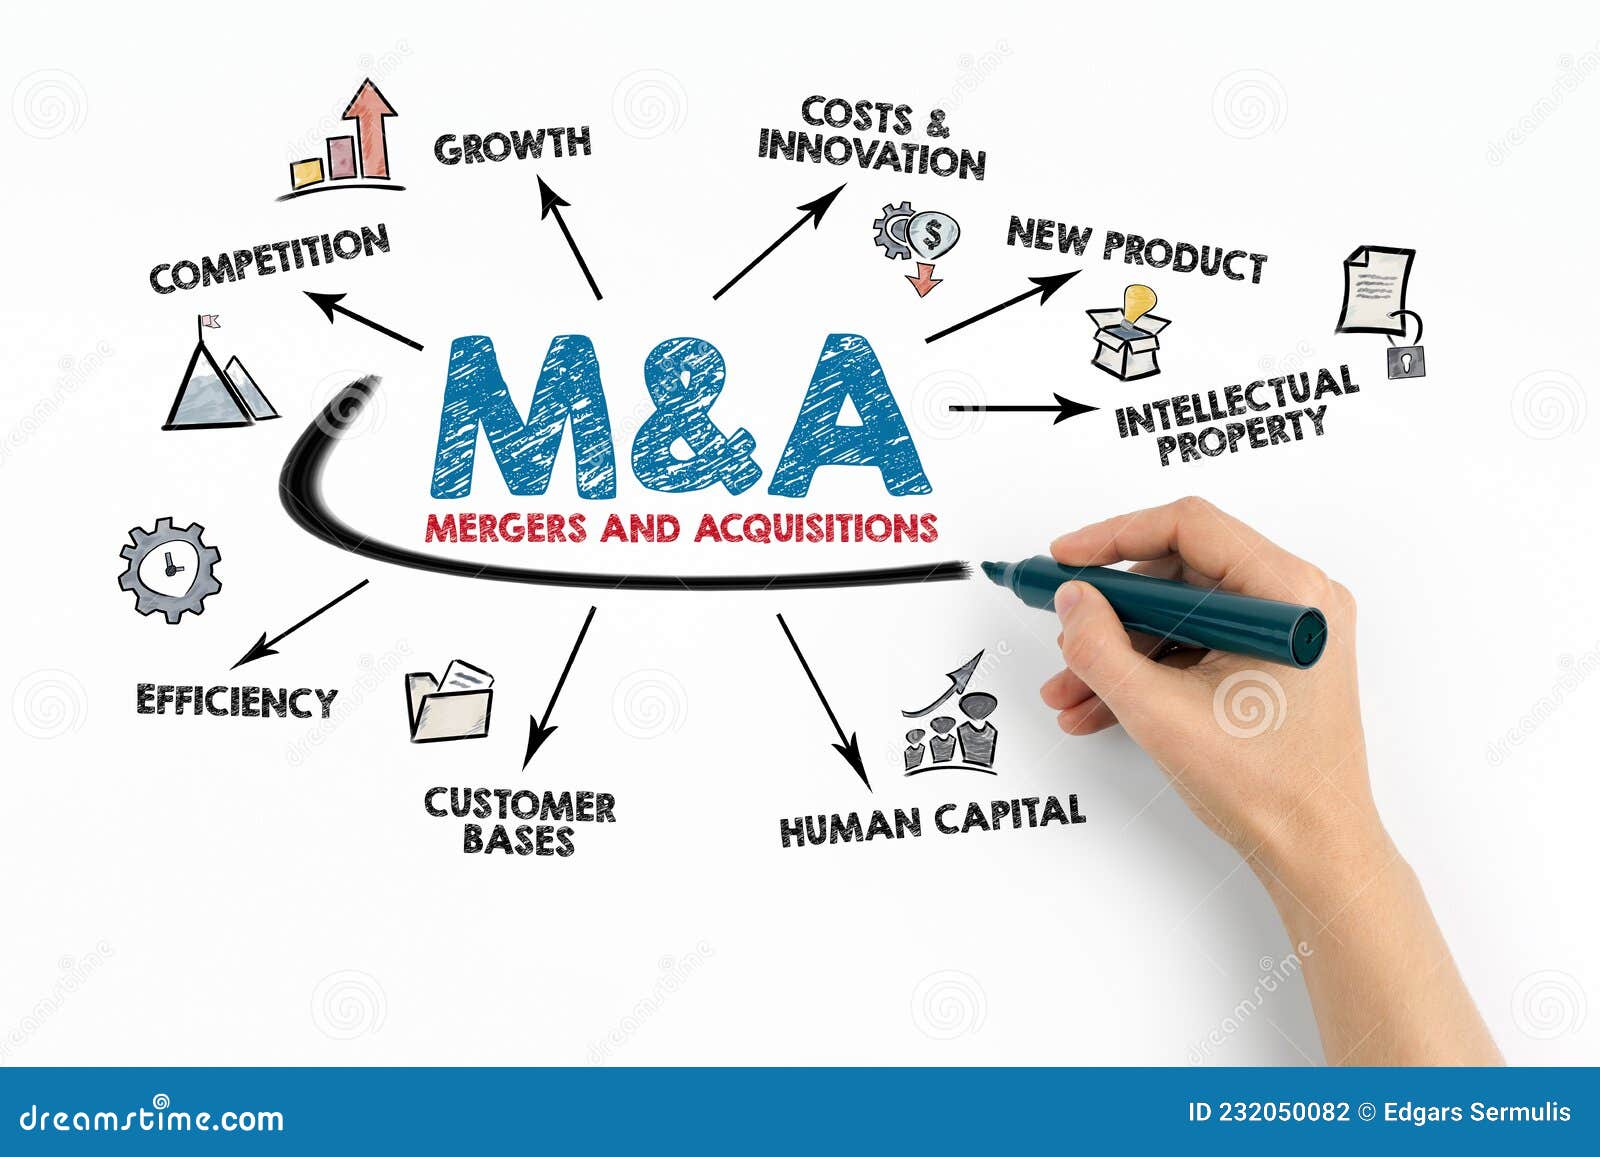 mergers and acquisitions. competition, new product, intellectual property and human capital concept